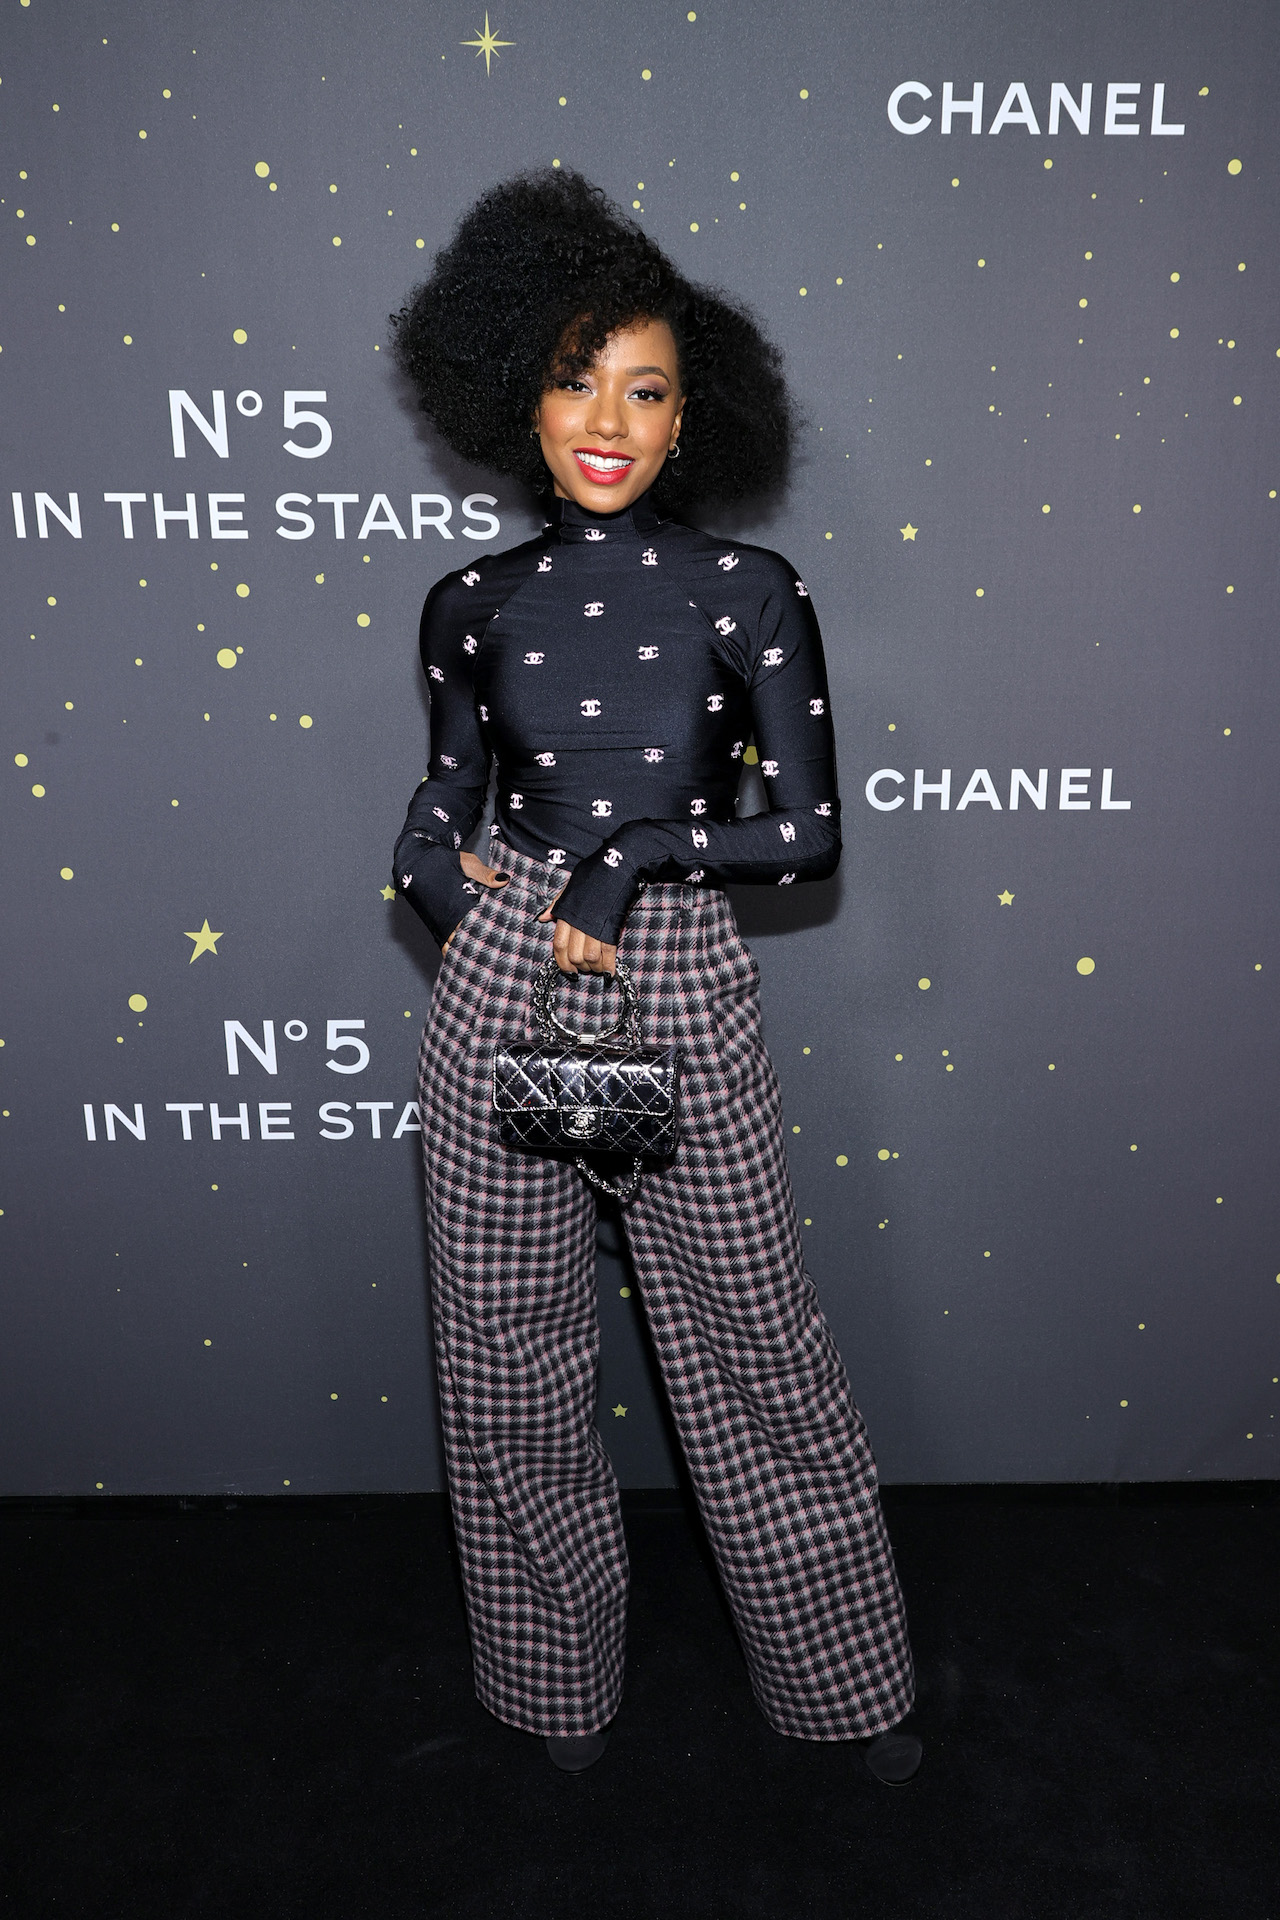 Alyah Chanelle Scott attends Chanel party